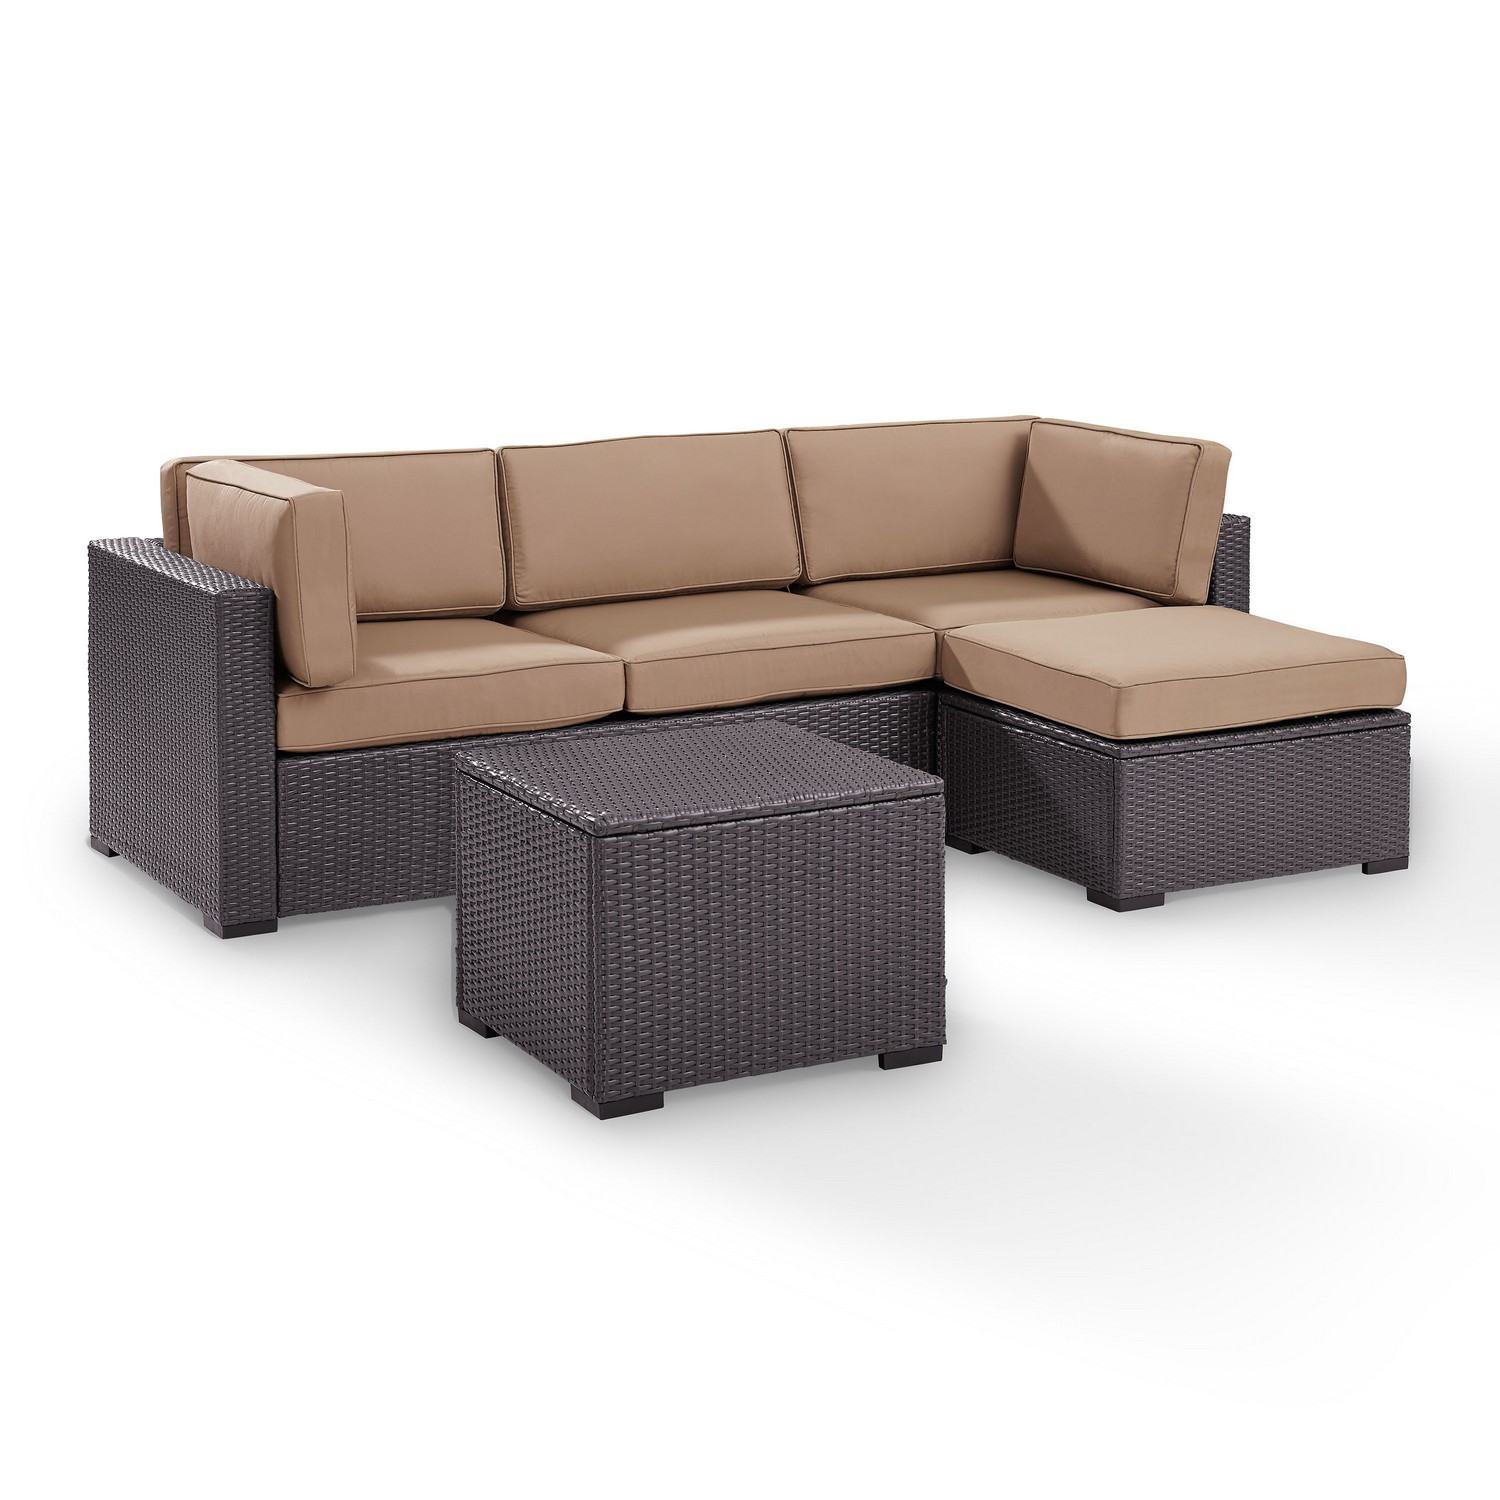 Crosley Biscayne 4-PC Outdoor Wicker Sectional Set - Loveseat, Corner Chair, Ottoman, Coffee Table - Mocha/Brown